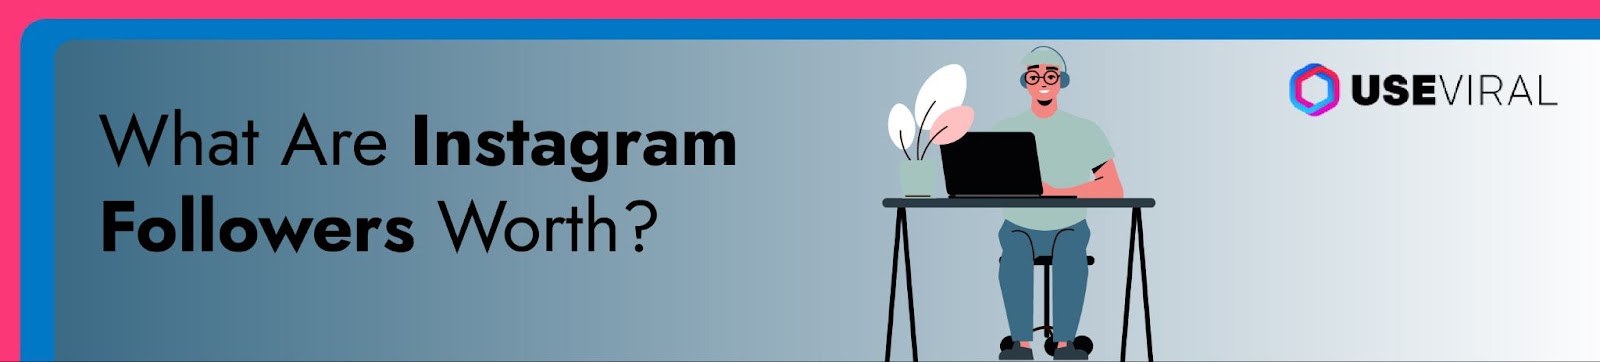 What Are Instagram Followers Worth?